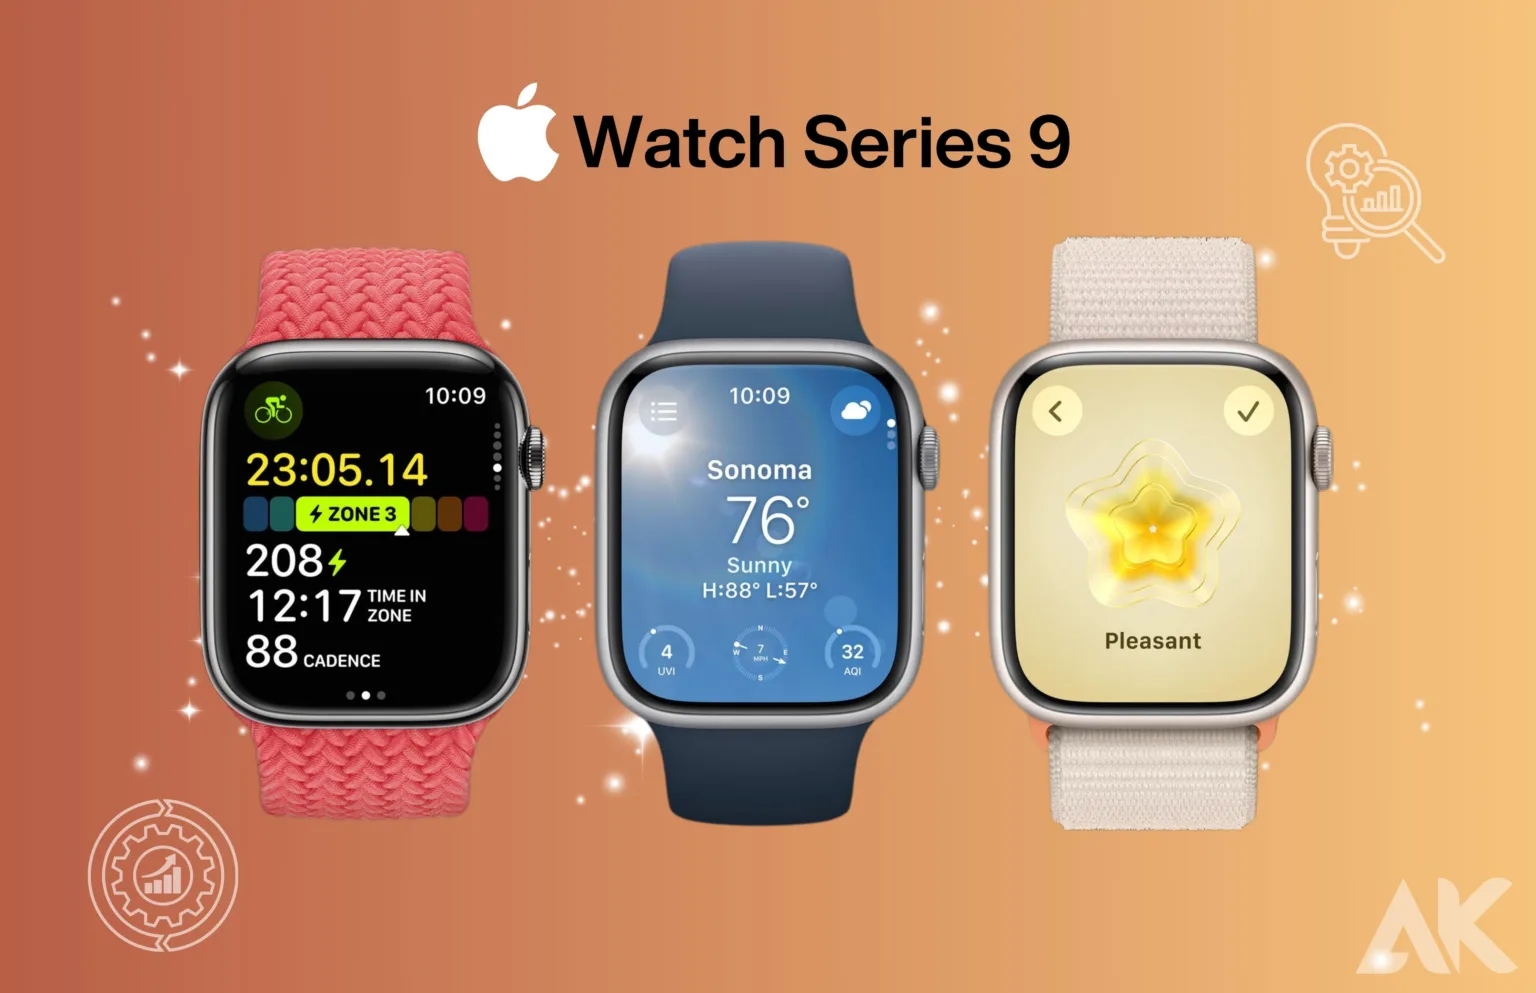 Apple Watch Series 9 News and Improvements - Exclusive Insights